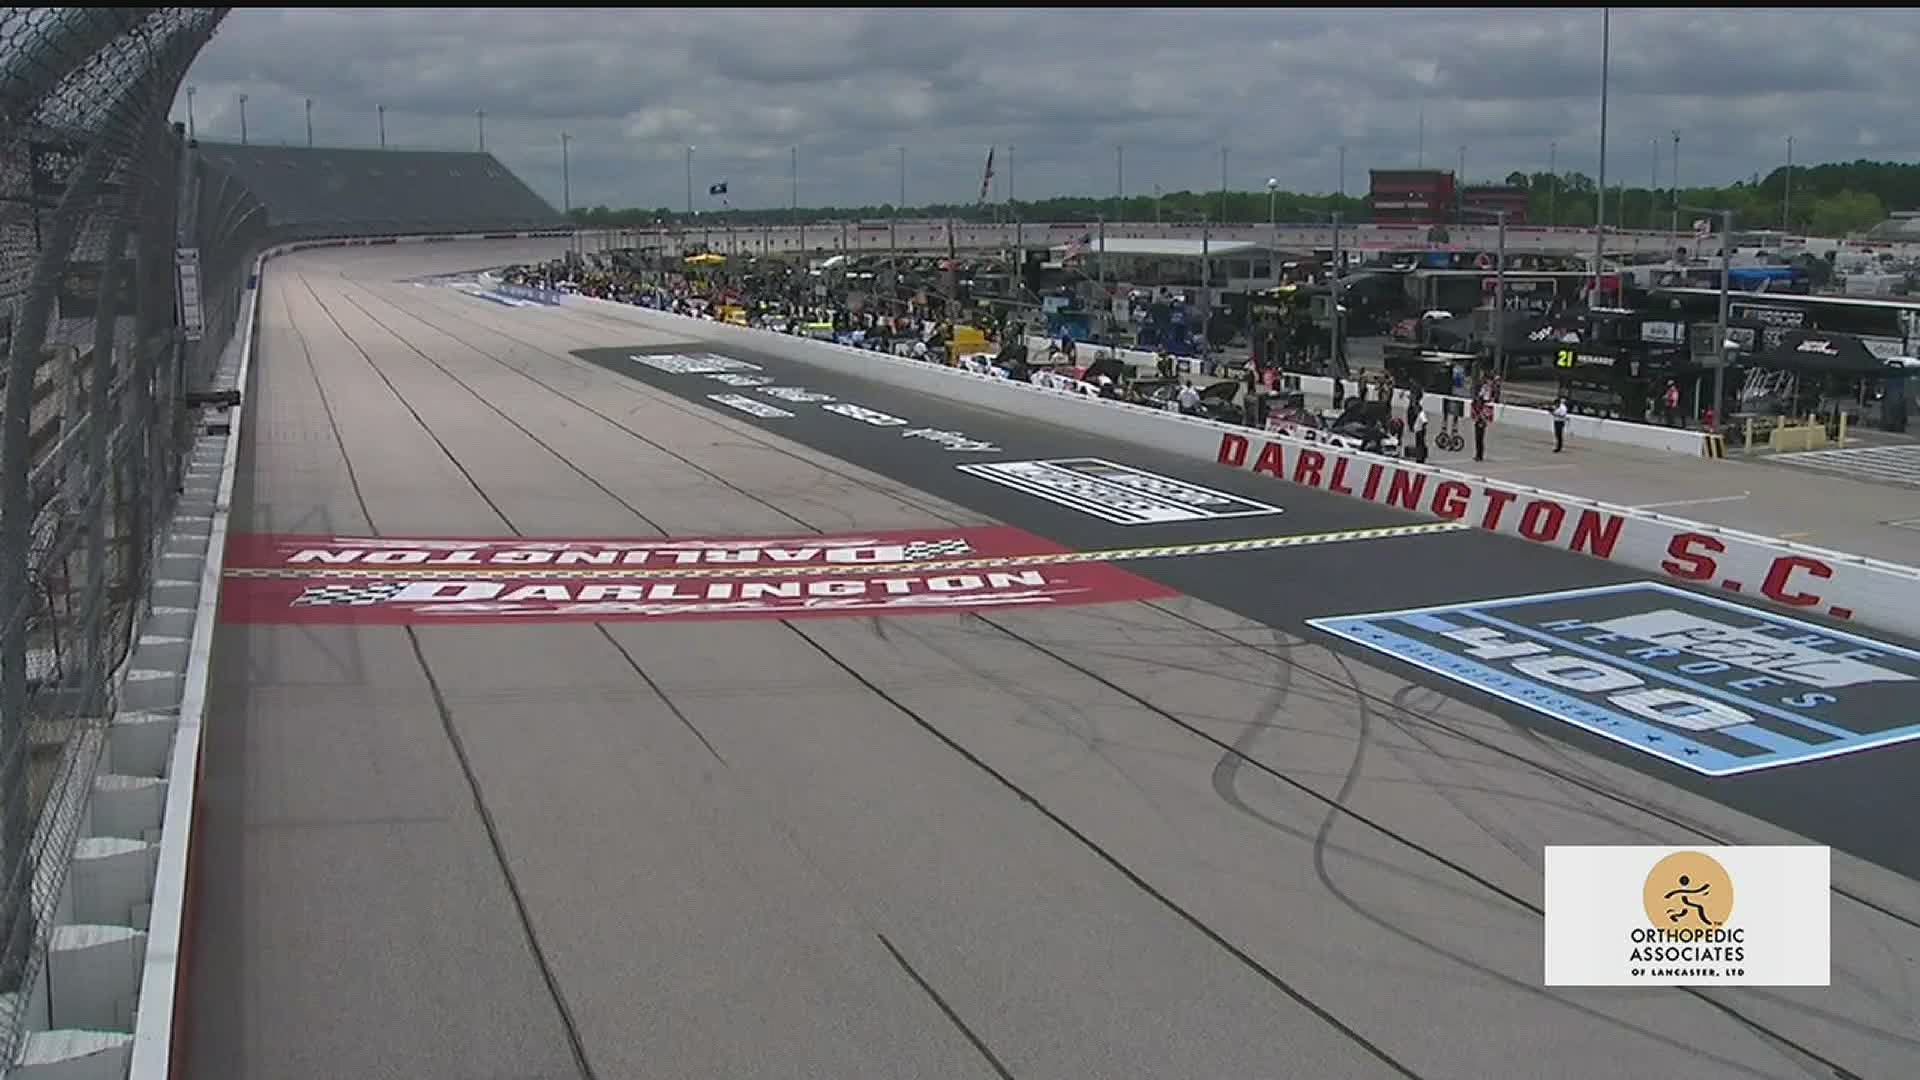 After a 10-week hiatus, NASCAR made its return to the track but with strict safety measures in place.